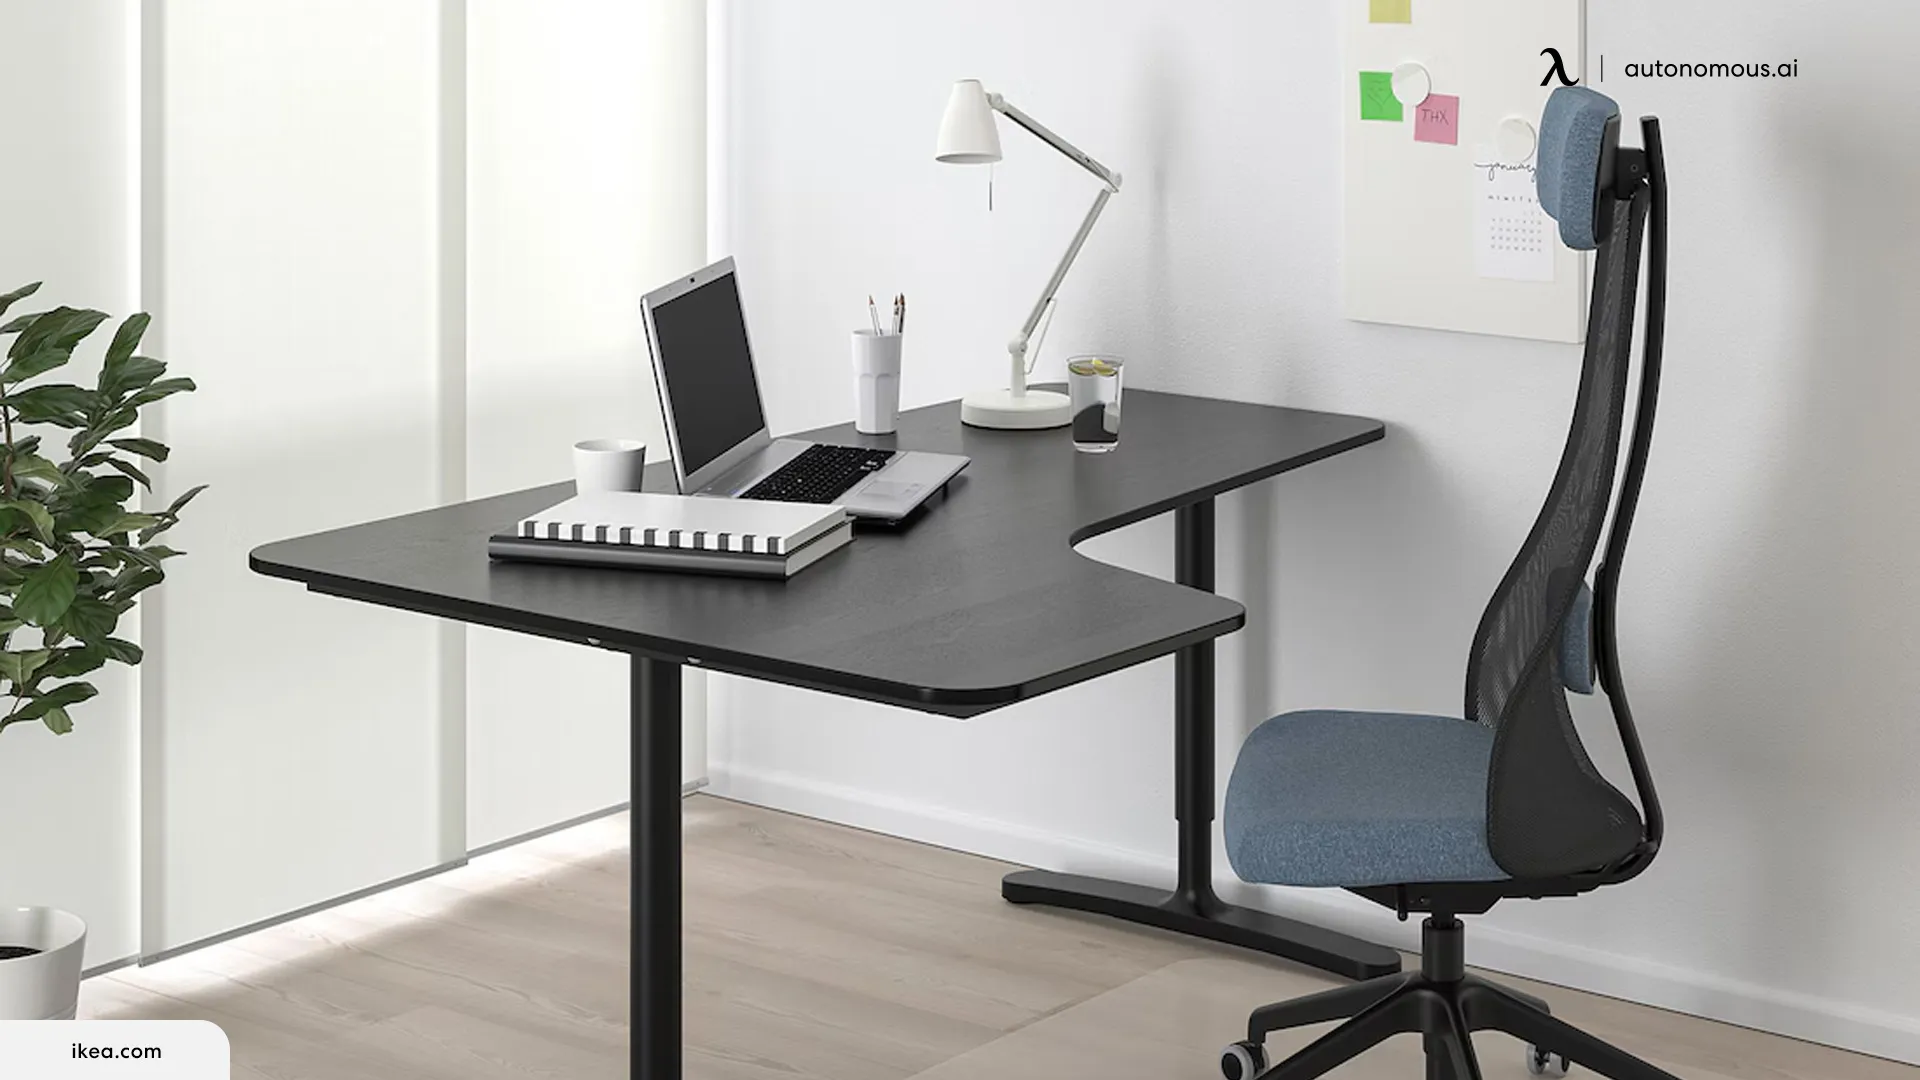 Why You Should Get the Best Corner Desk for Home Office Spaces